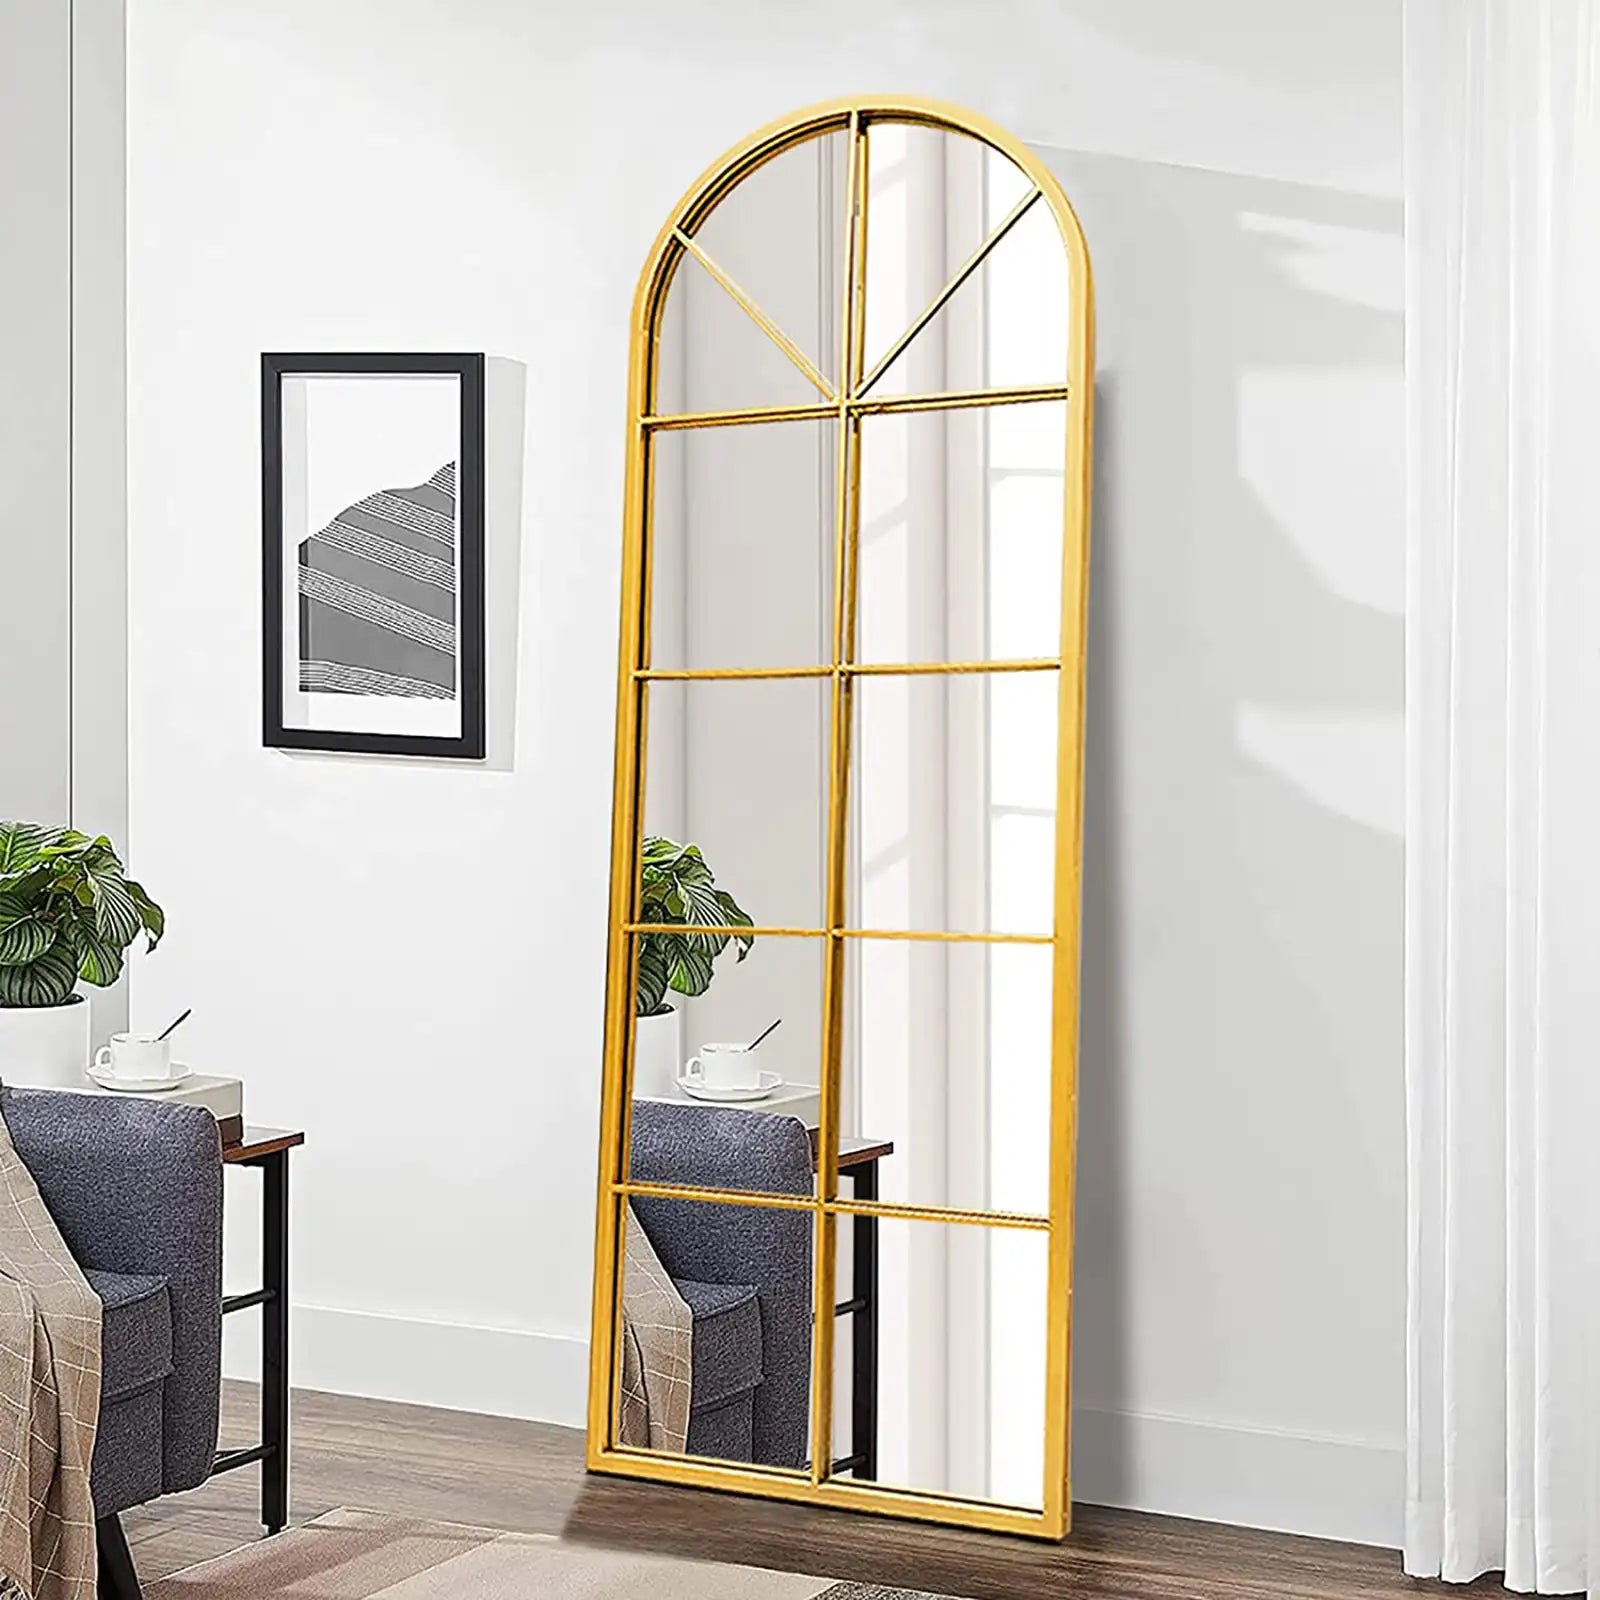 Floor Full Length Mirror, Gold Arched-Top Mirror Full Length, Large Windows Pane Mirror, Wall Mounted Mirror, 65"x22" Standing Mirror Hanging or Leaning, Body Mirrors for Bedroom, No Stand